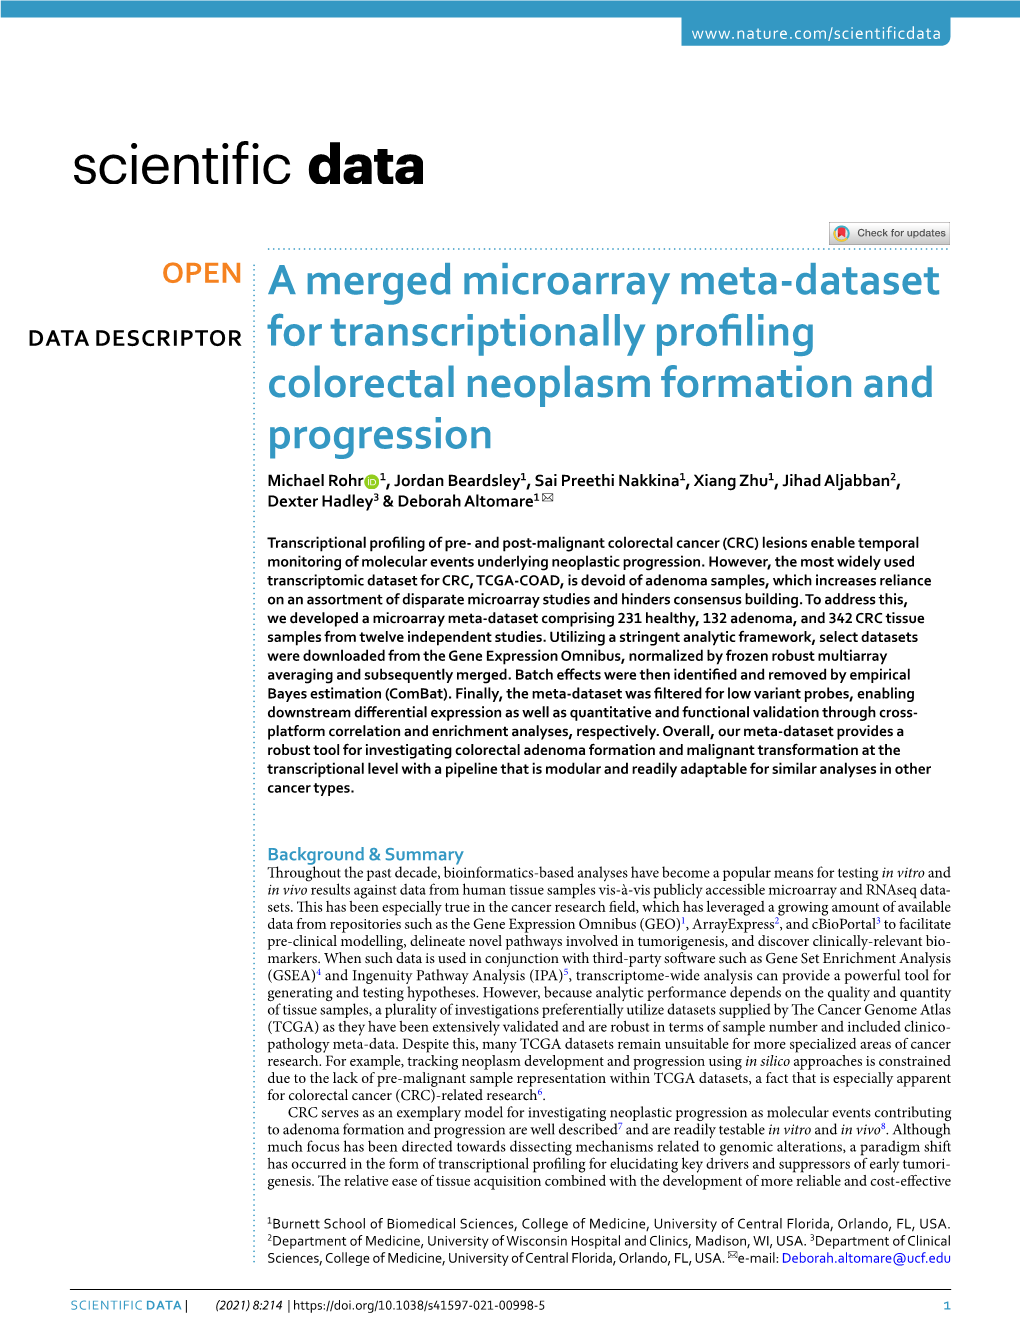 A Merged Microarray Meta-Dataset for Transcriptionally Profiling Colorectal Neoplasm Formation and Progression